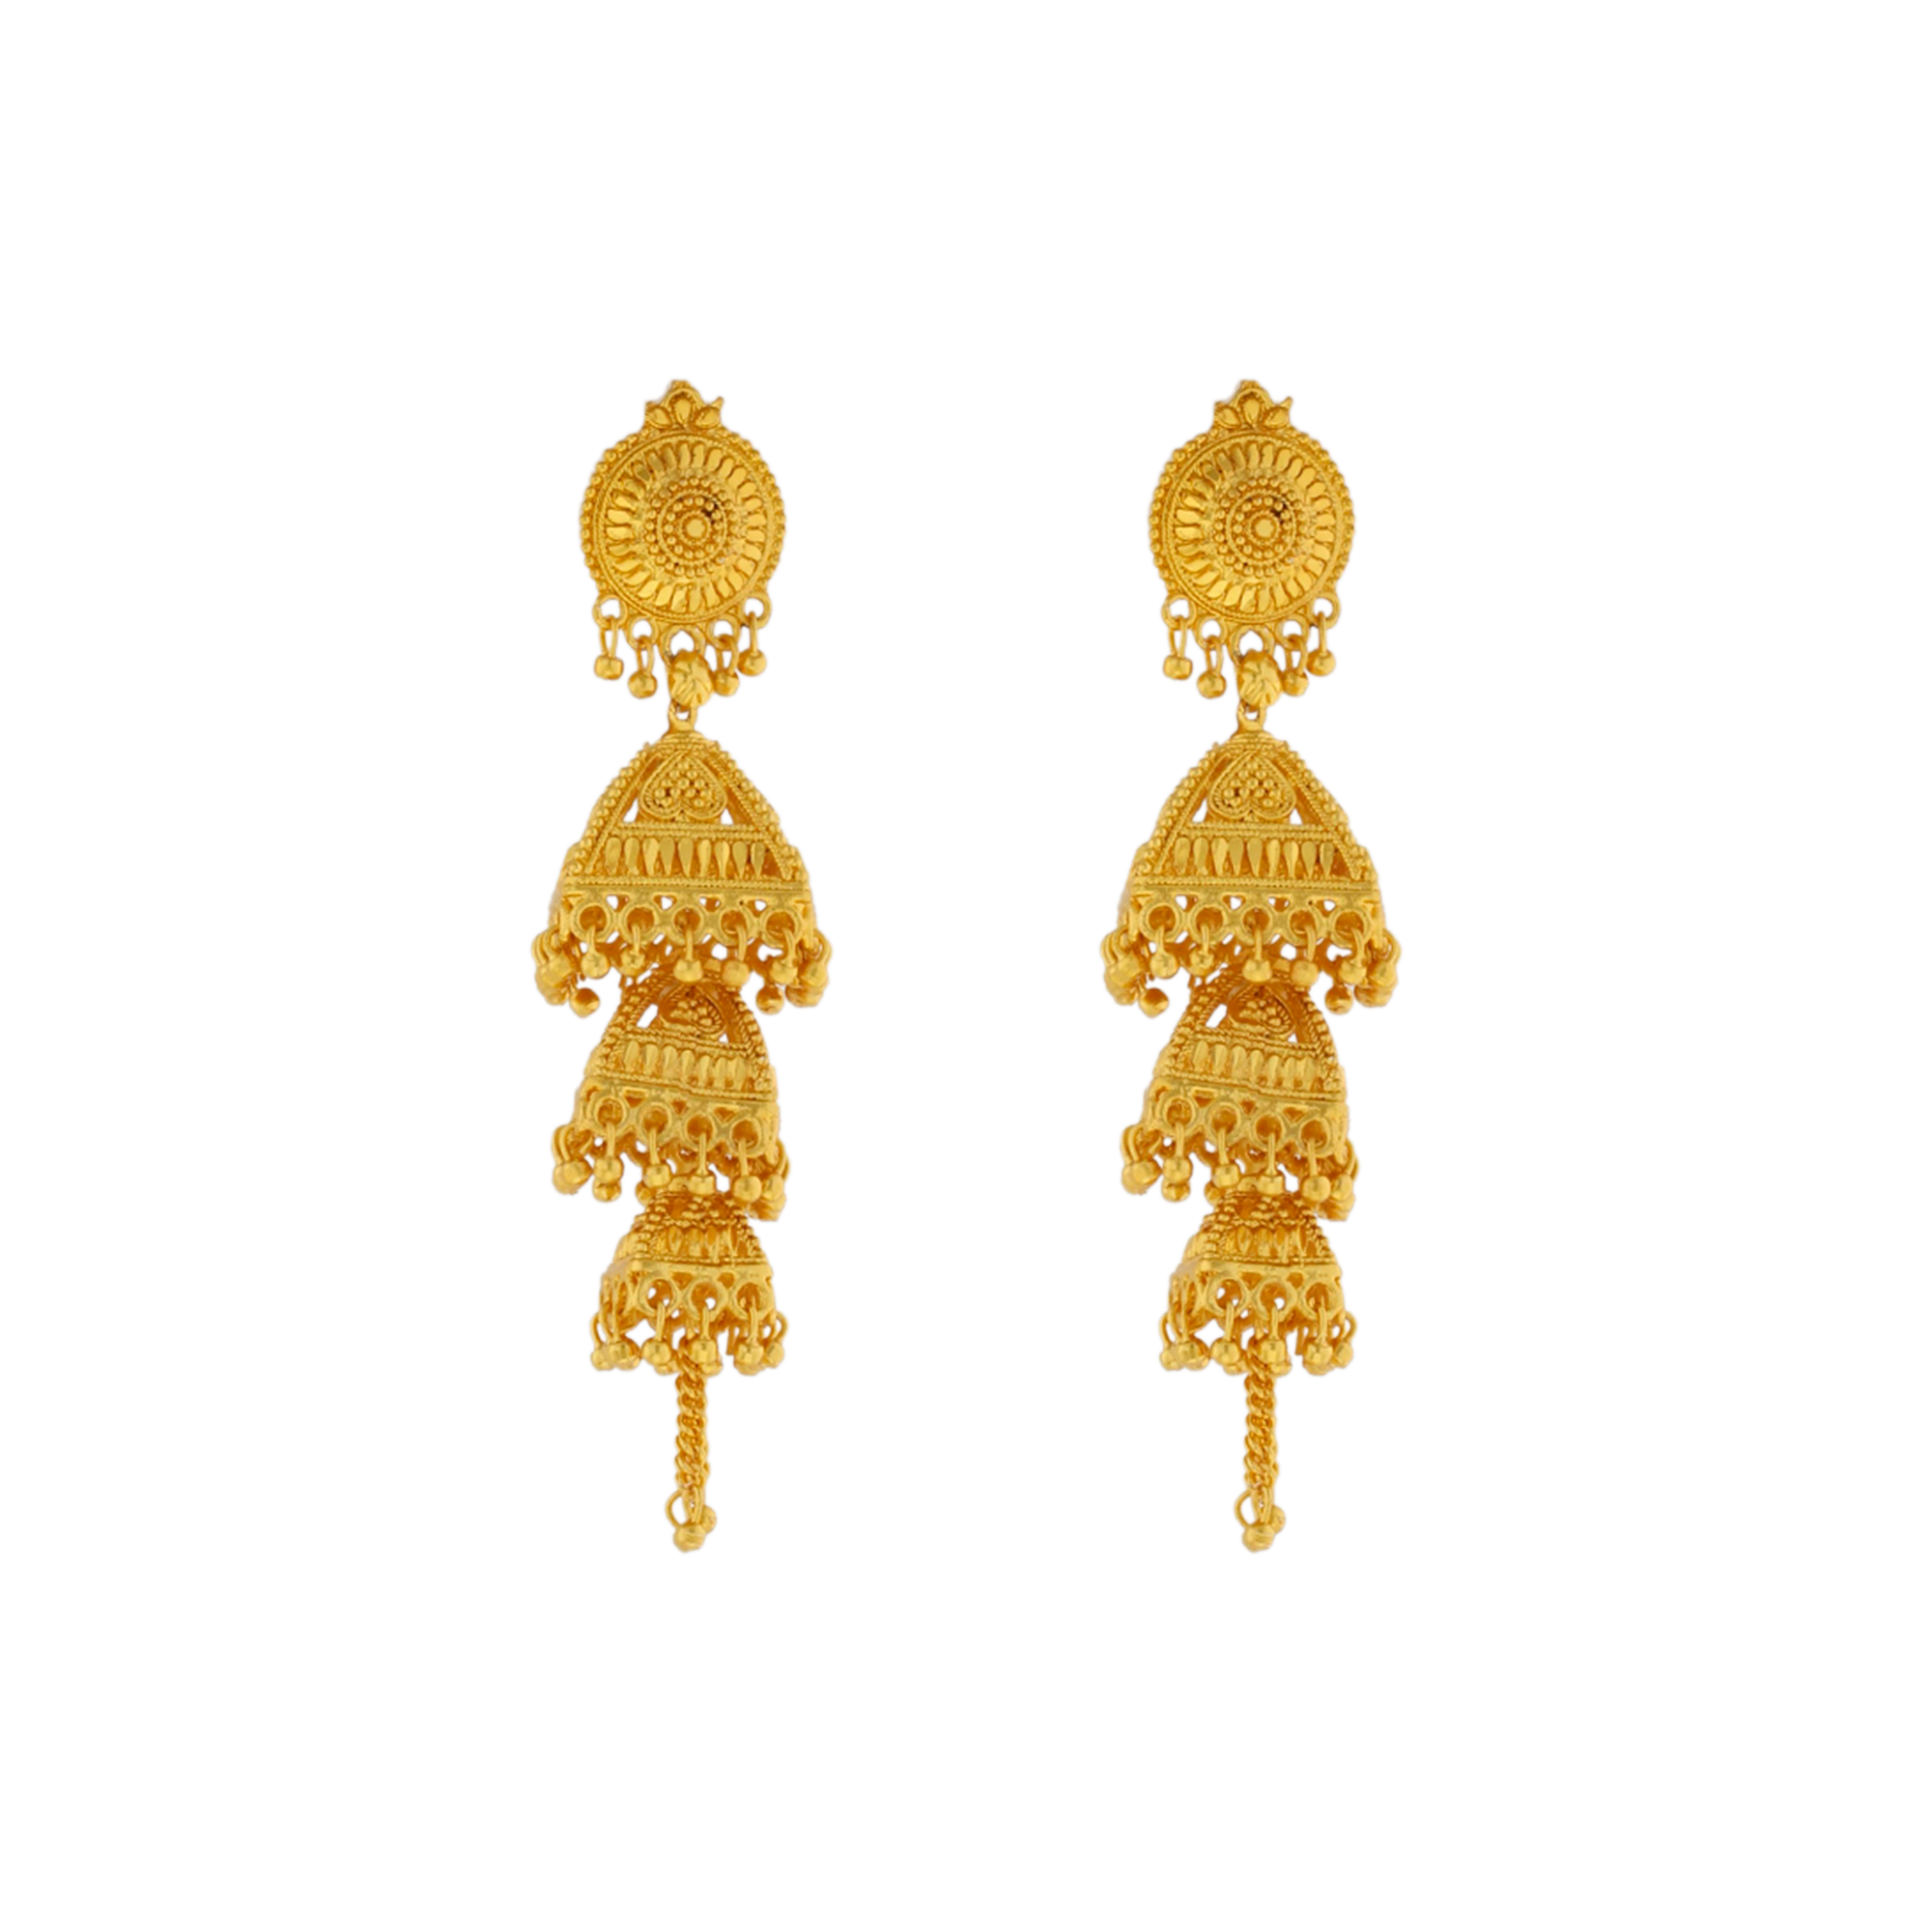 Gold-Plated Earrings A Versatile Addition to Your Jewelry Collection